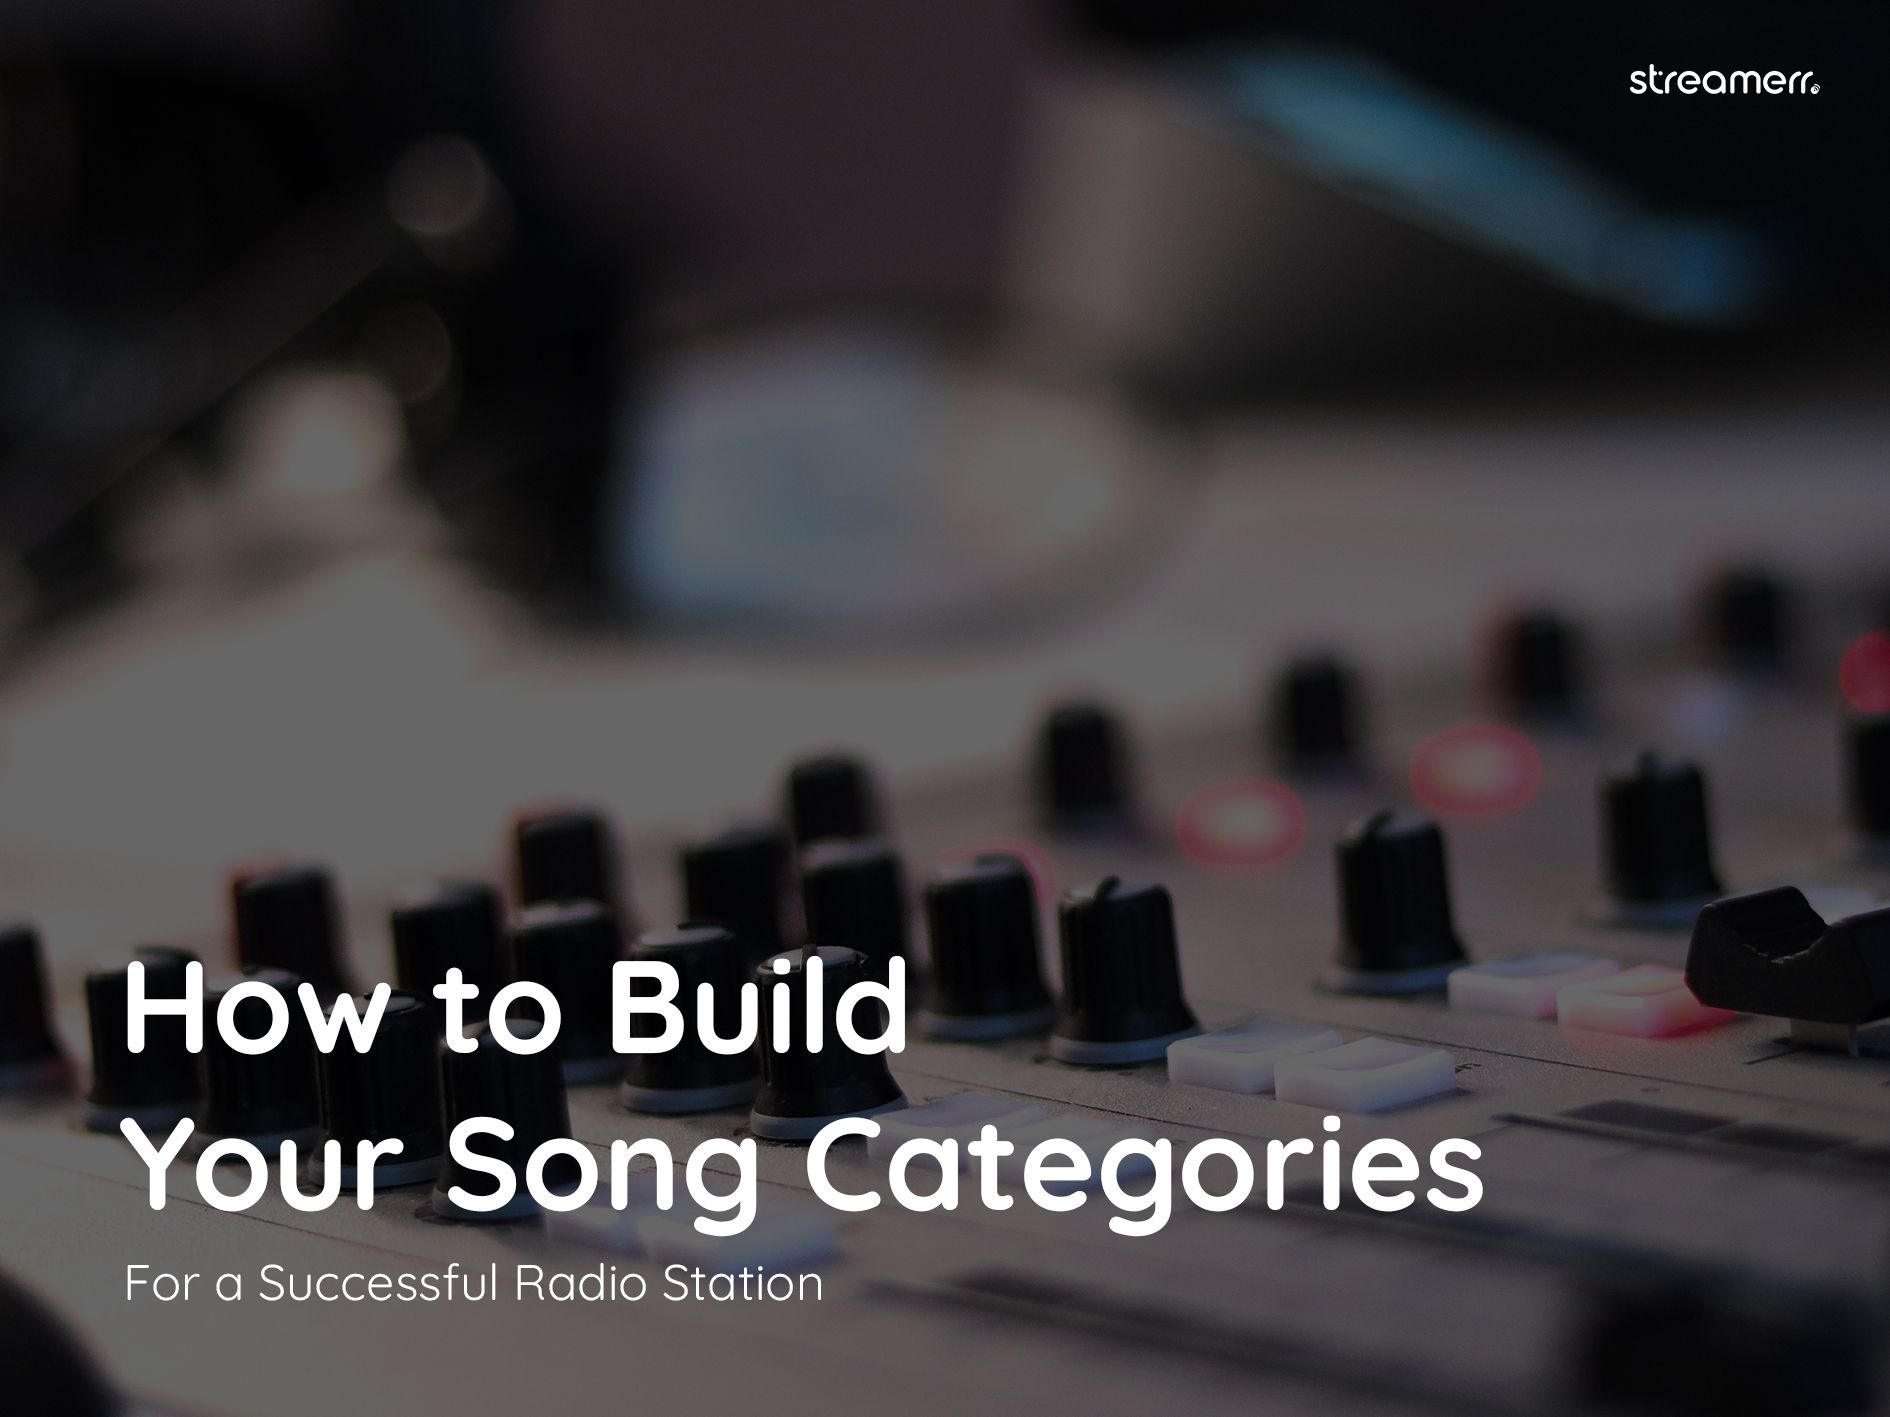 How to Build Your Song Categories for a Successful Radio Station